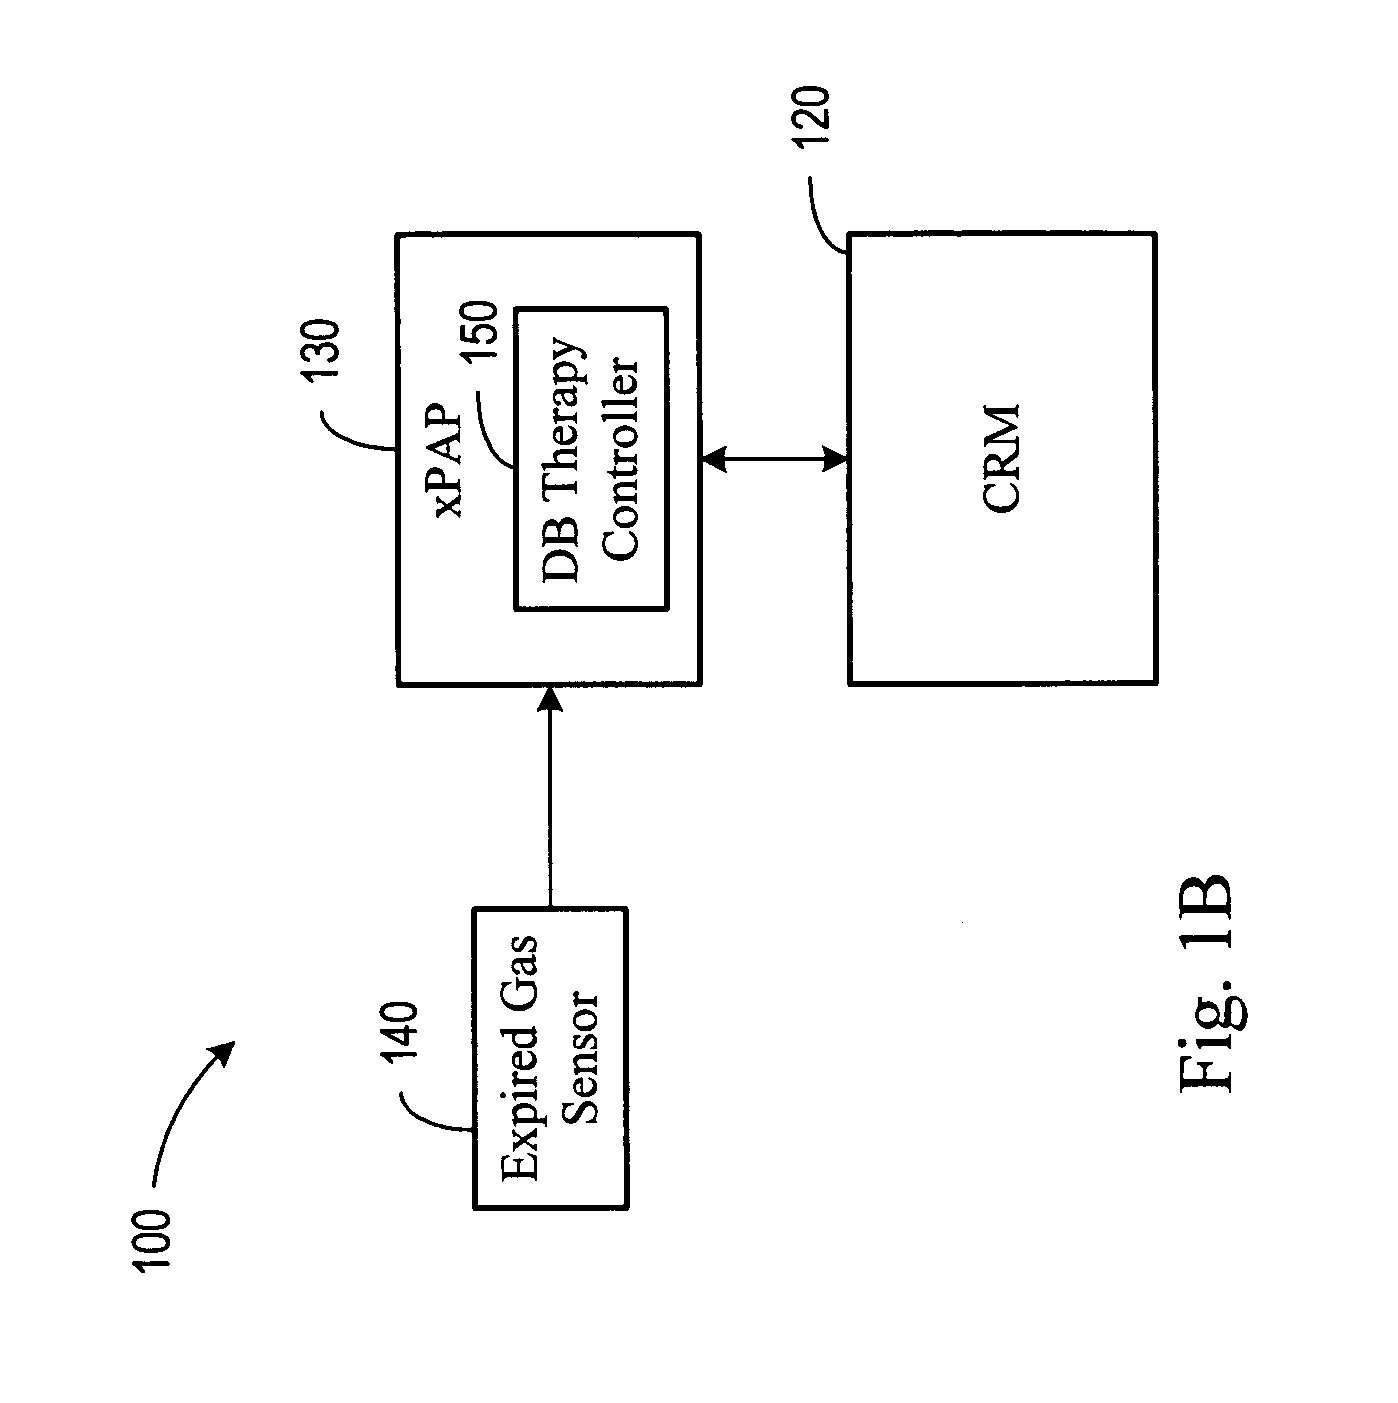 Diagnosis and/or therapy using blood chemistry/expired gas parameter analysis